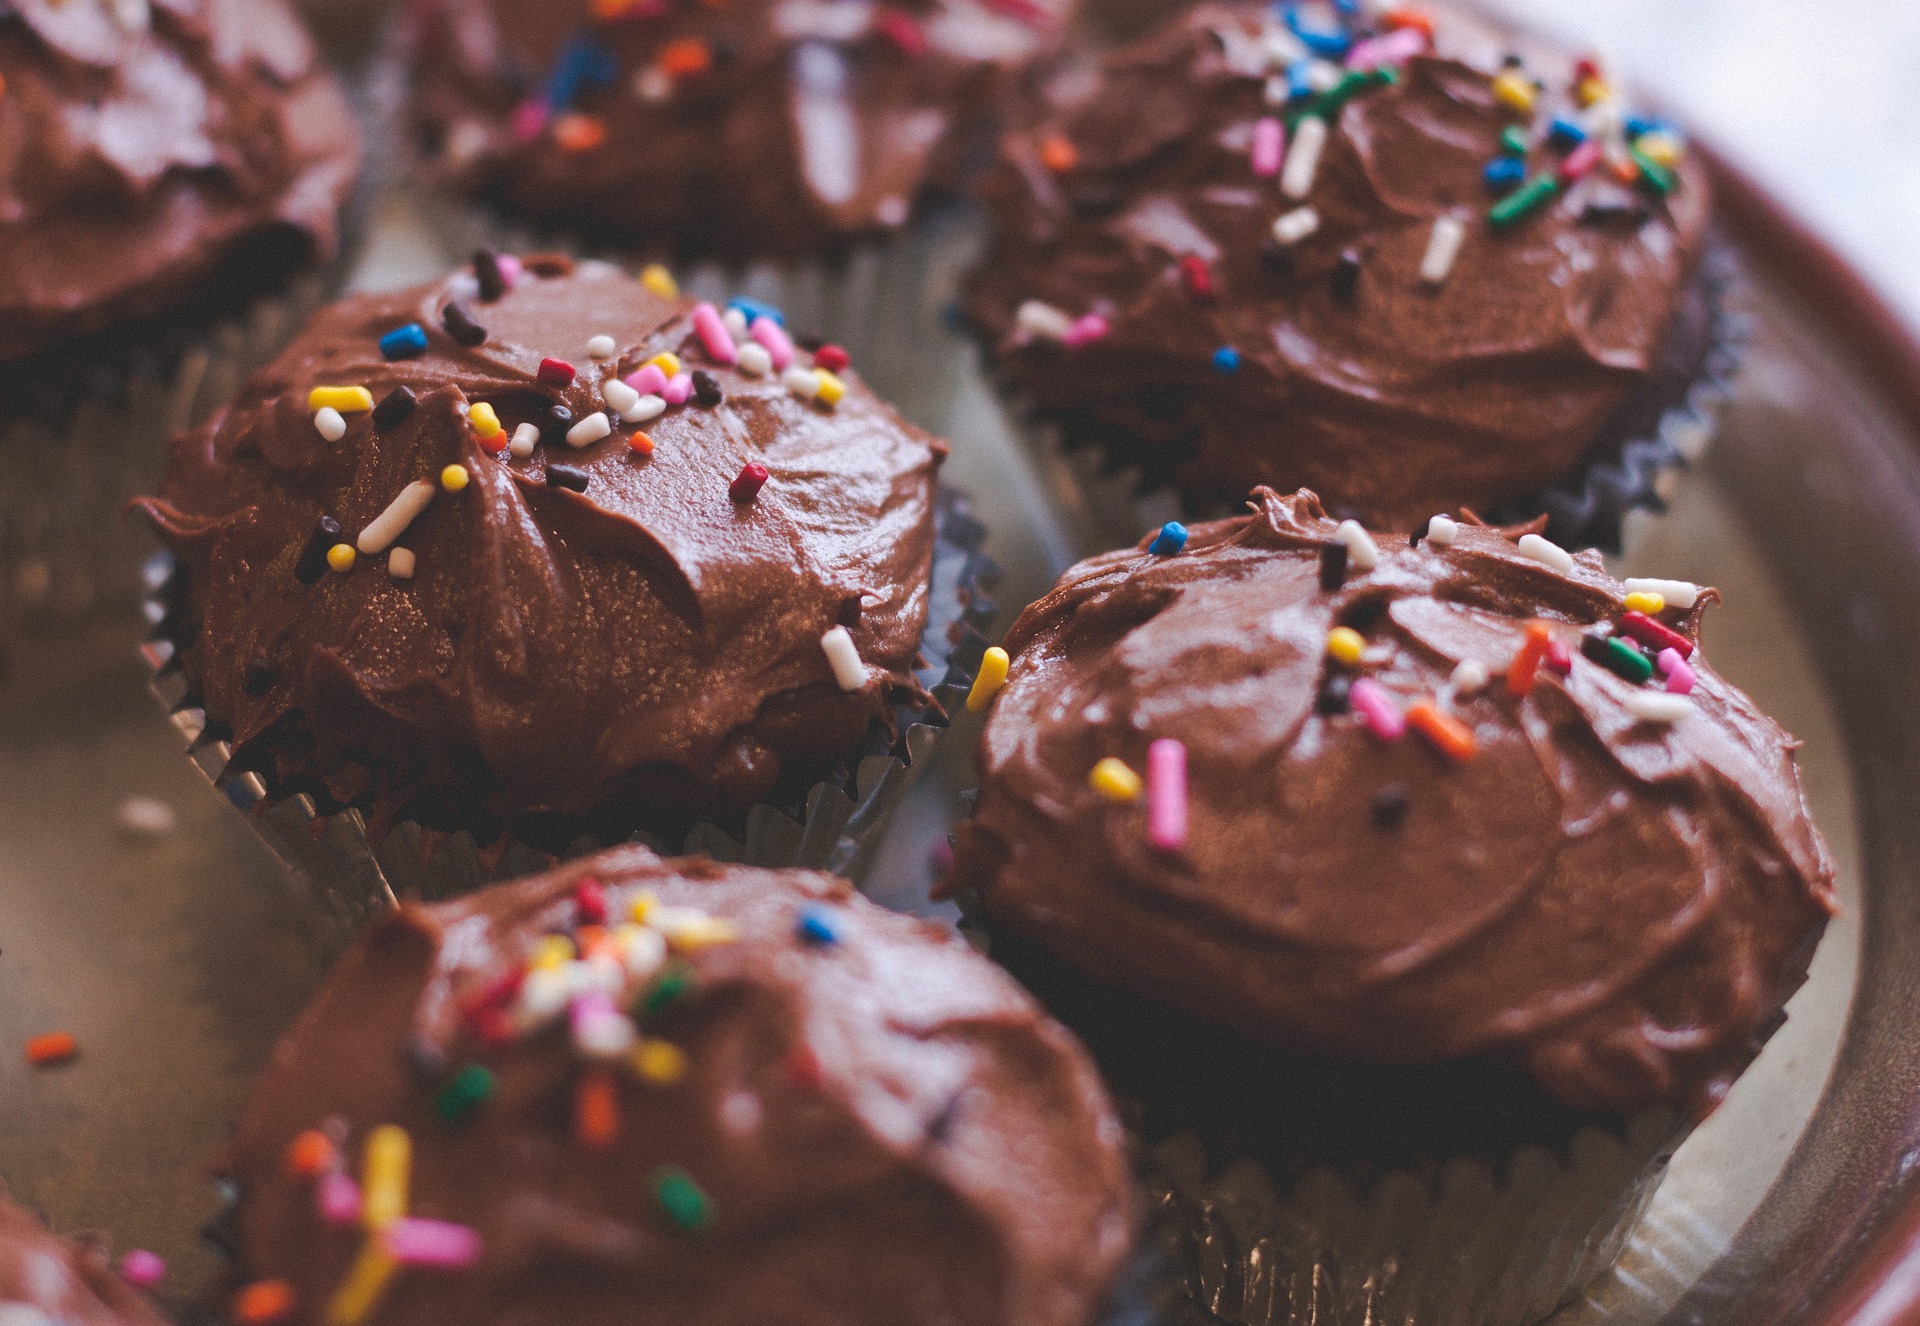 A plate of chocolate cupcakes with rainbow sprinkles